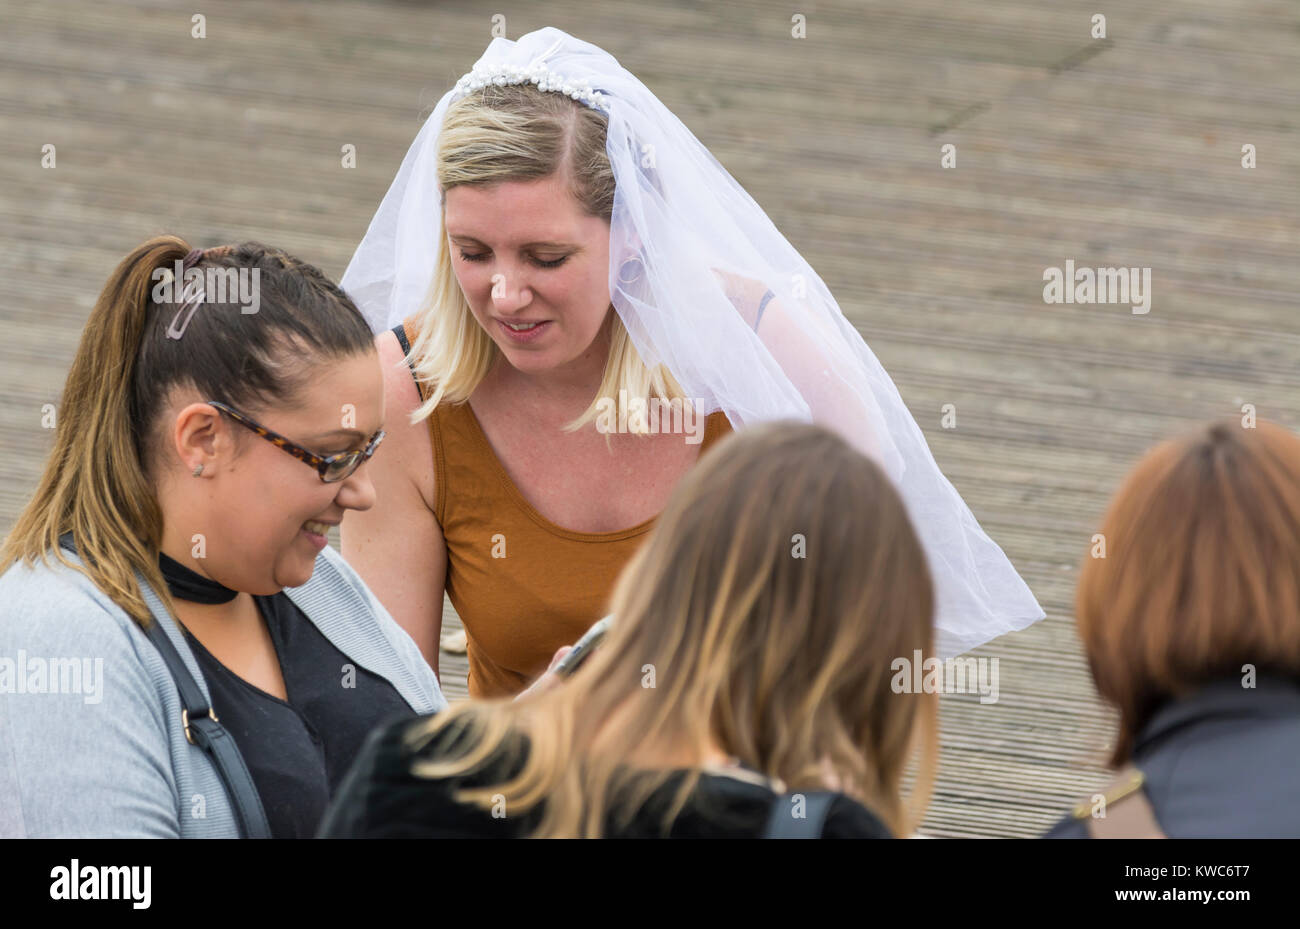 Group of young women with a bride to be wearing a wedding veil on a daytime hen party in the UK. Stock Photo